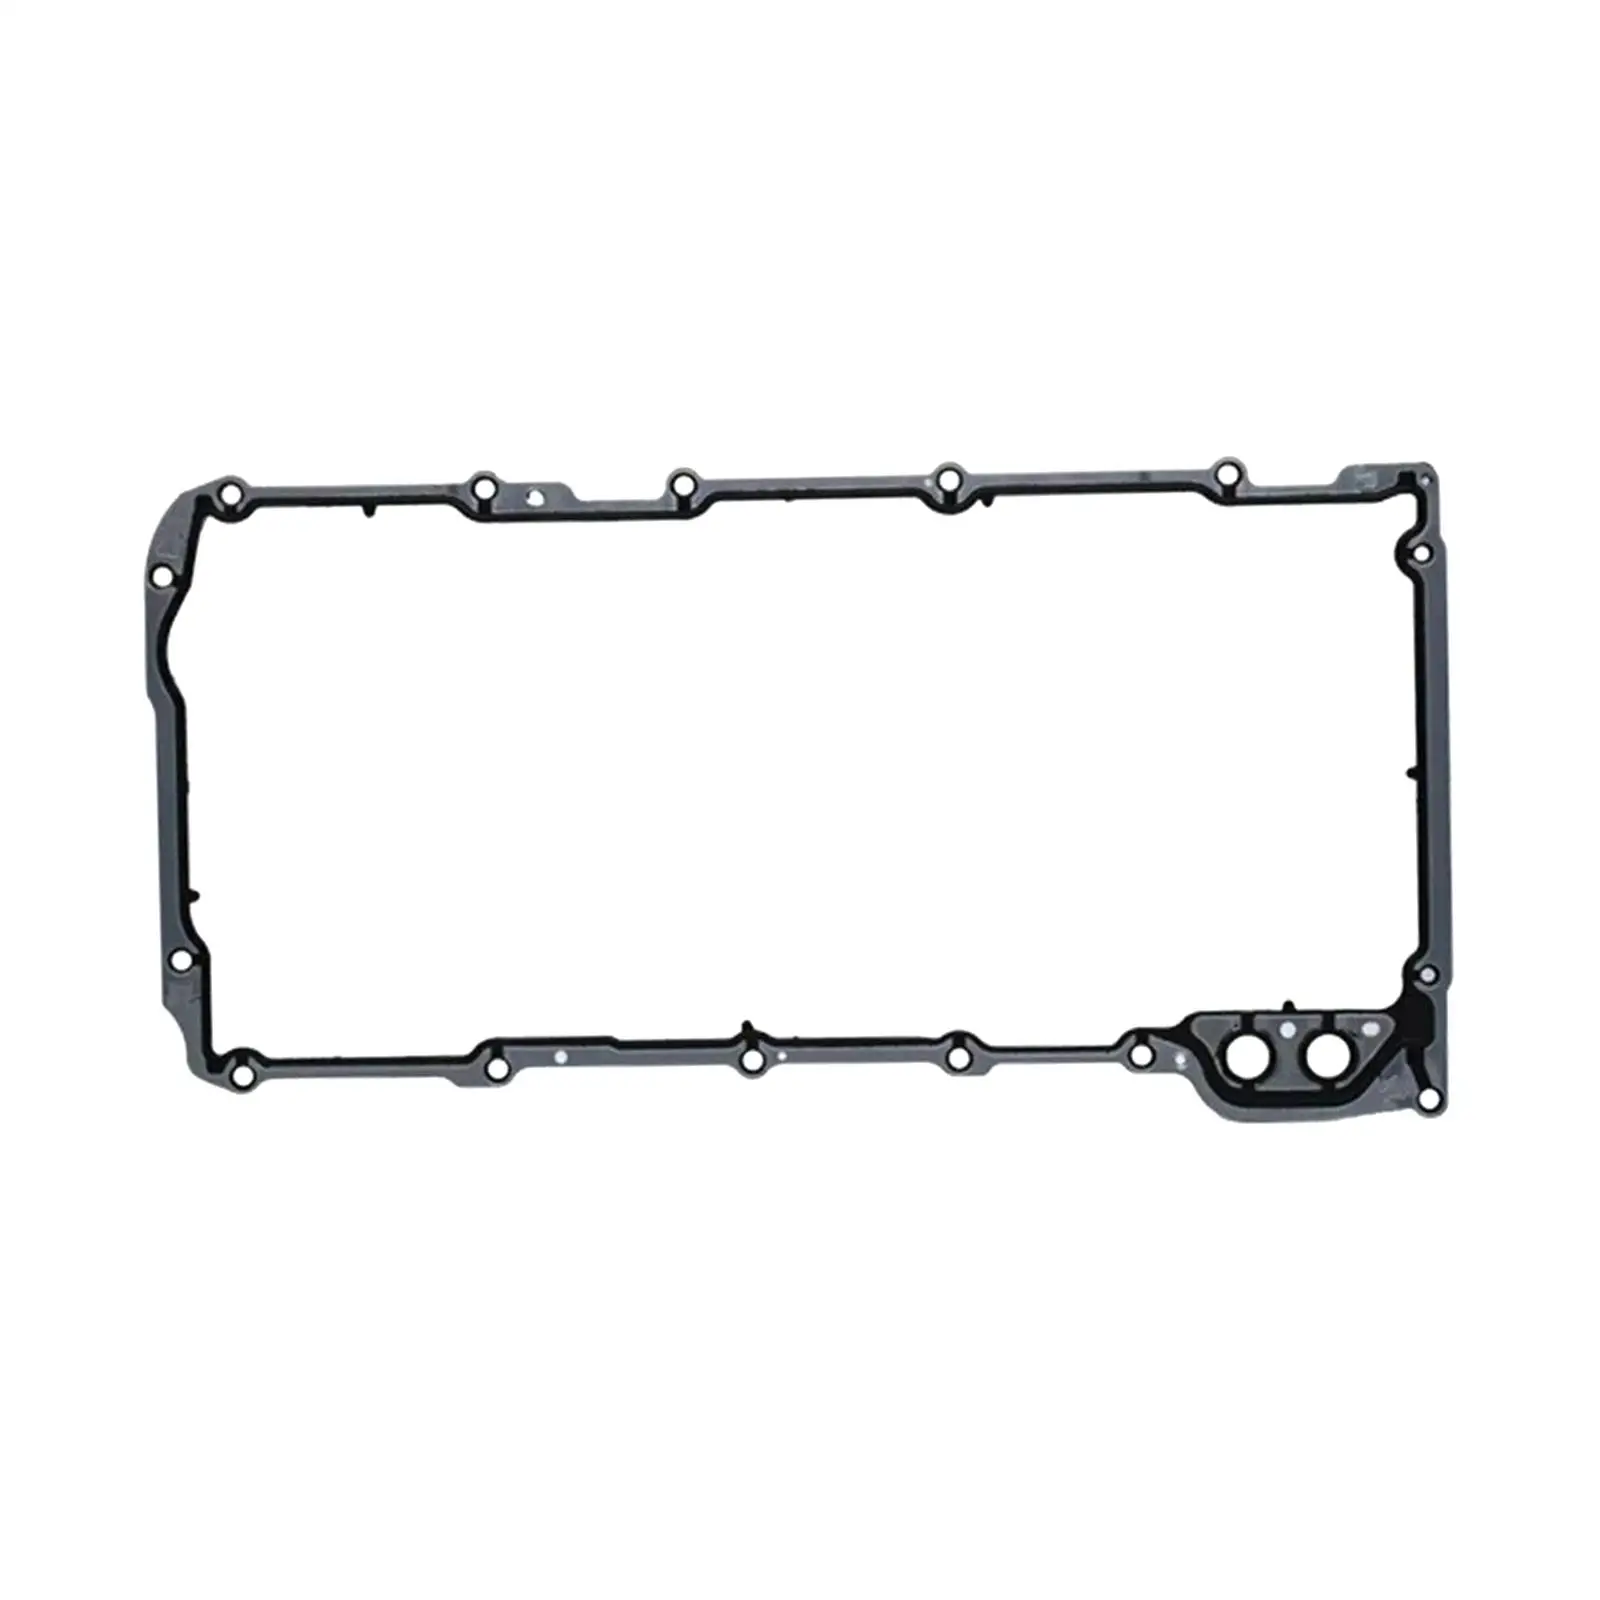 Engine Oil Pan Gasket 12612350 for Hummer Easy to Install Durable